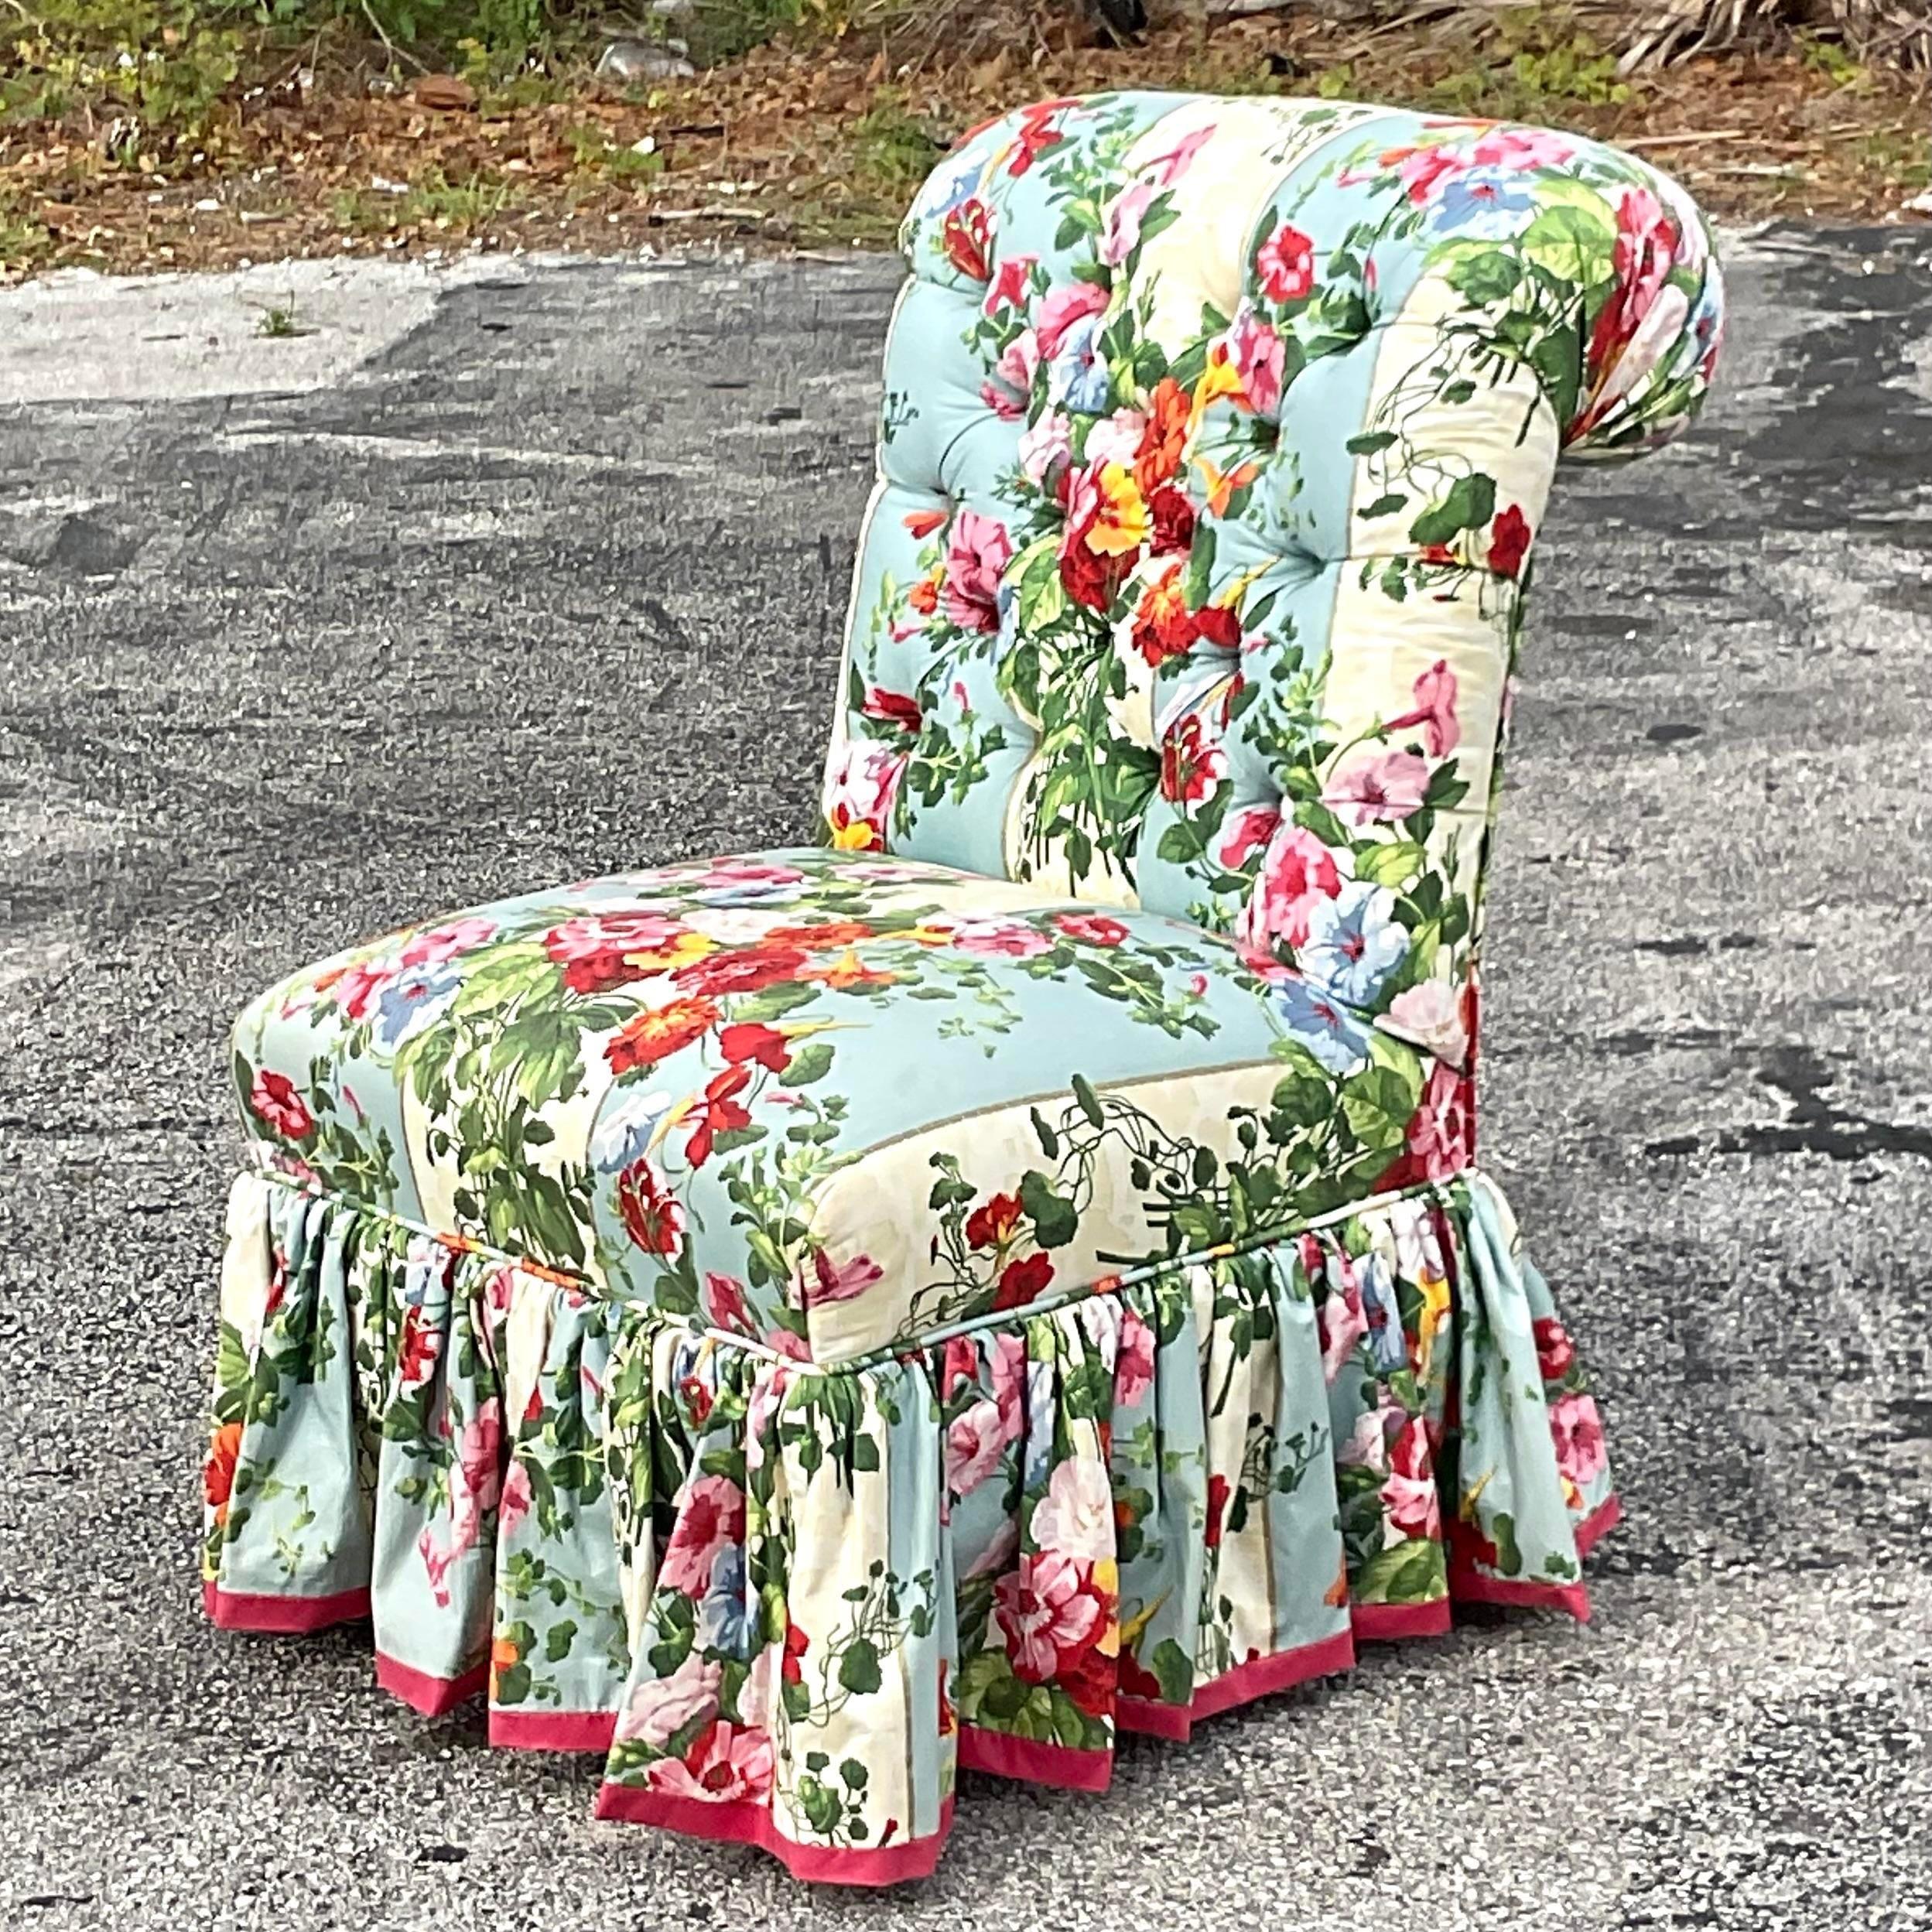 A fabulous vintage Regency club chair. A chic quilted floral upholstery in a waxed cotton. Coordinating slipper chair also available on my page. Acquired from a Palm Beach estate.